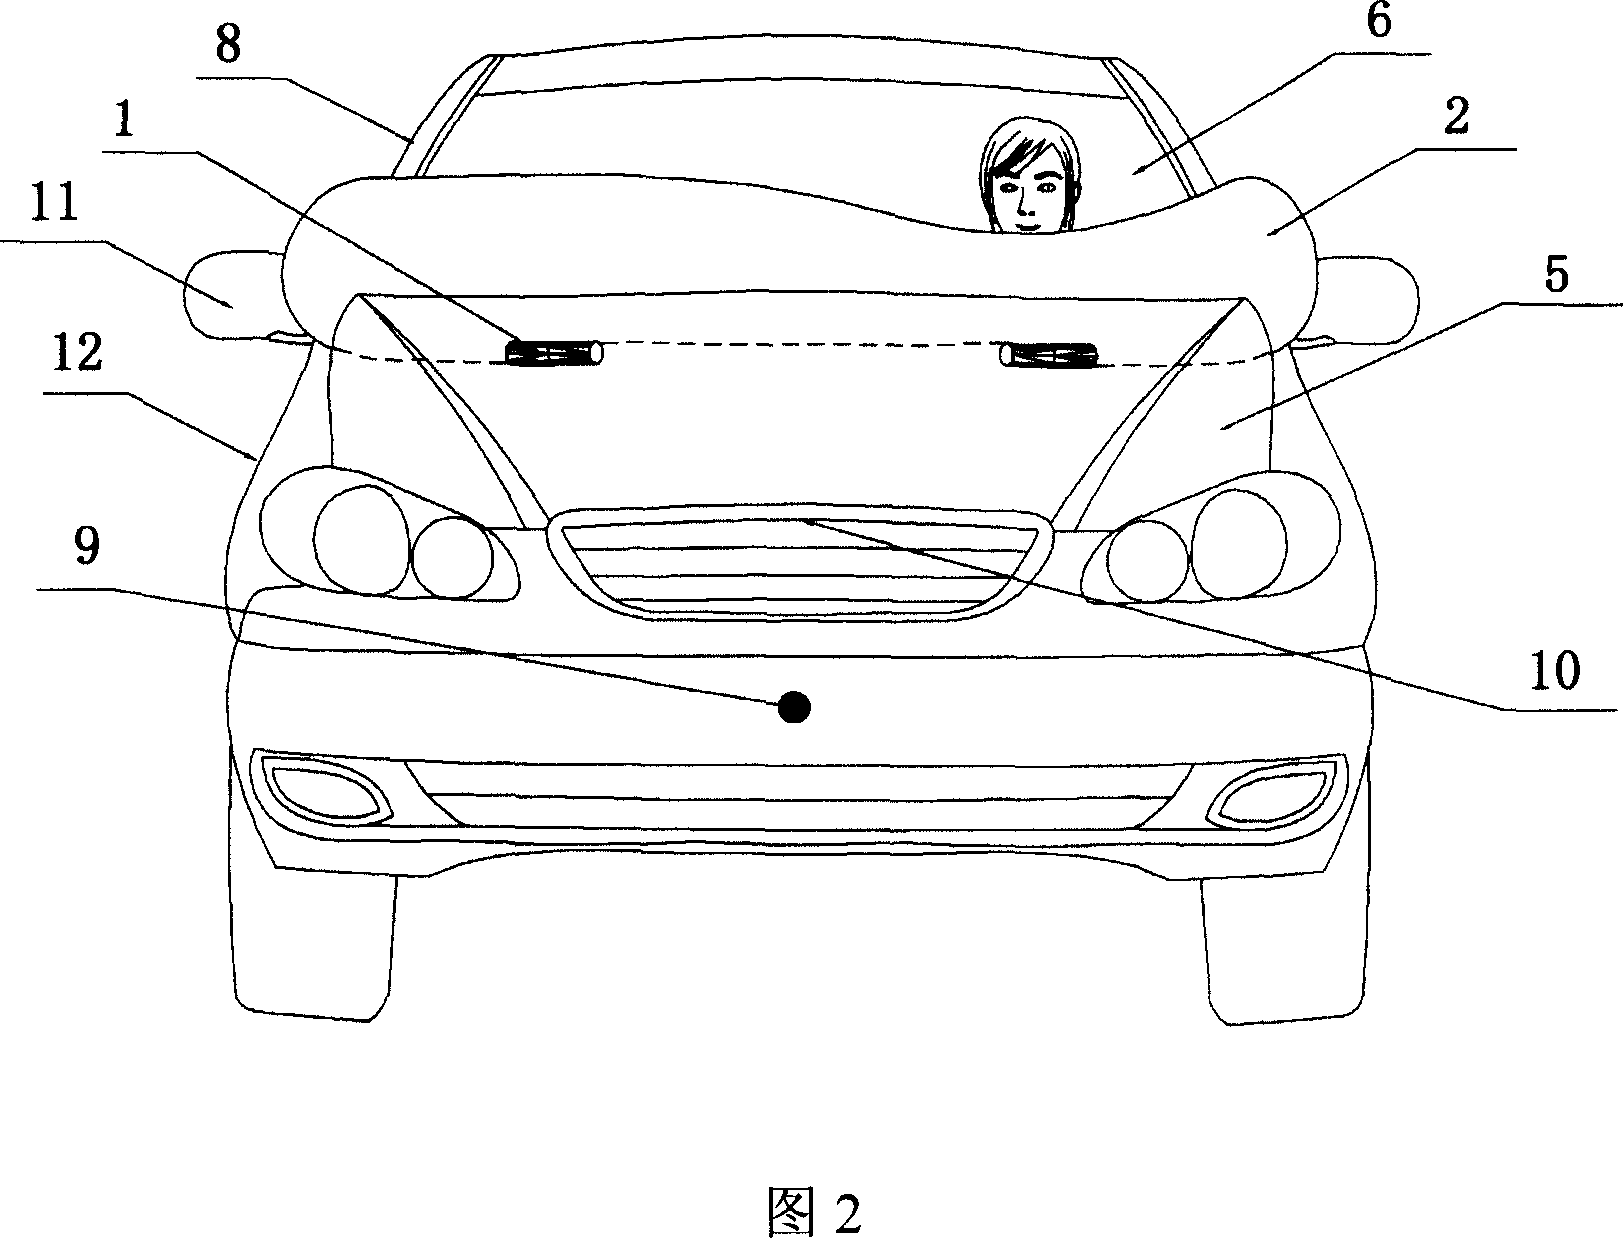 Vehicle with pedestrian protecting mechanism